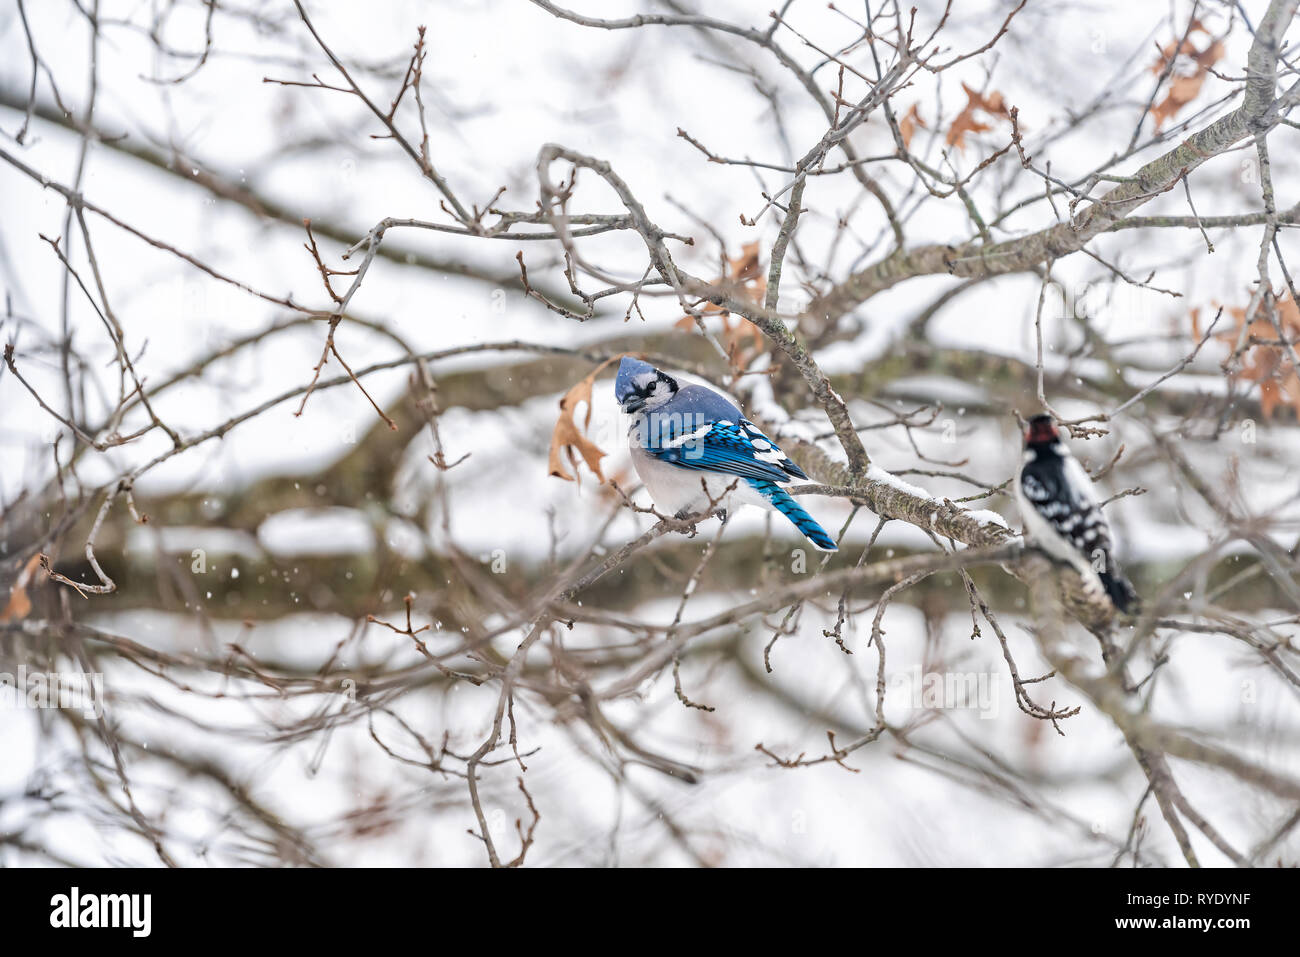 Closeup of two birds perched together with blue jay, Cyanocitta cristata, and downy or hairy woodpecker sitting on oak tree branch during winter snow  Stock Photo